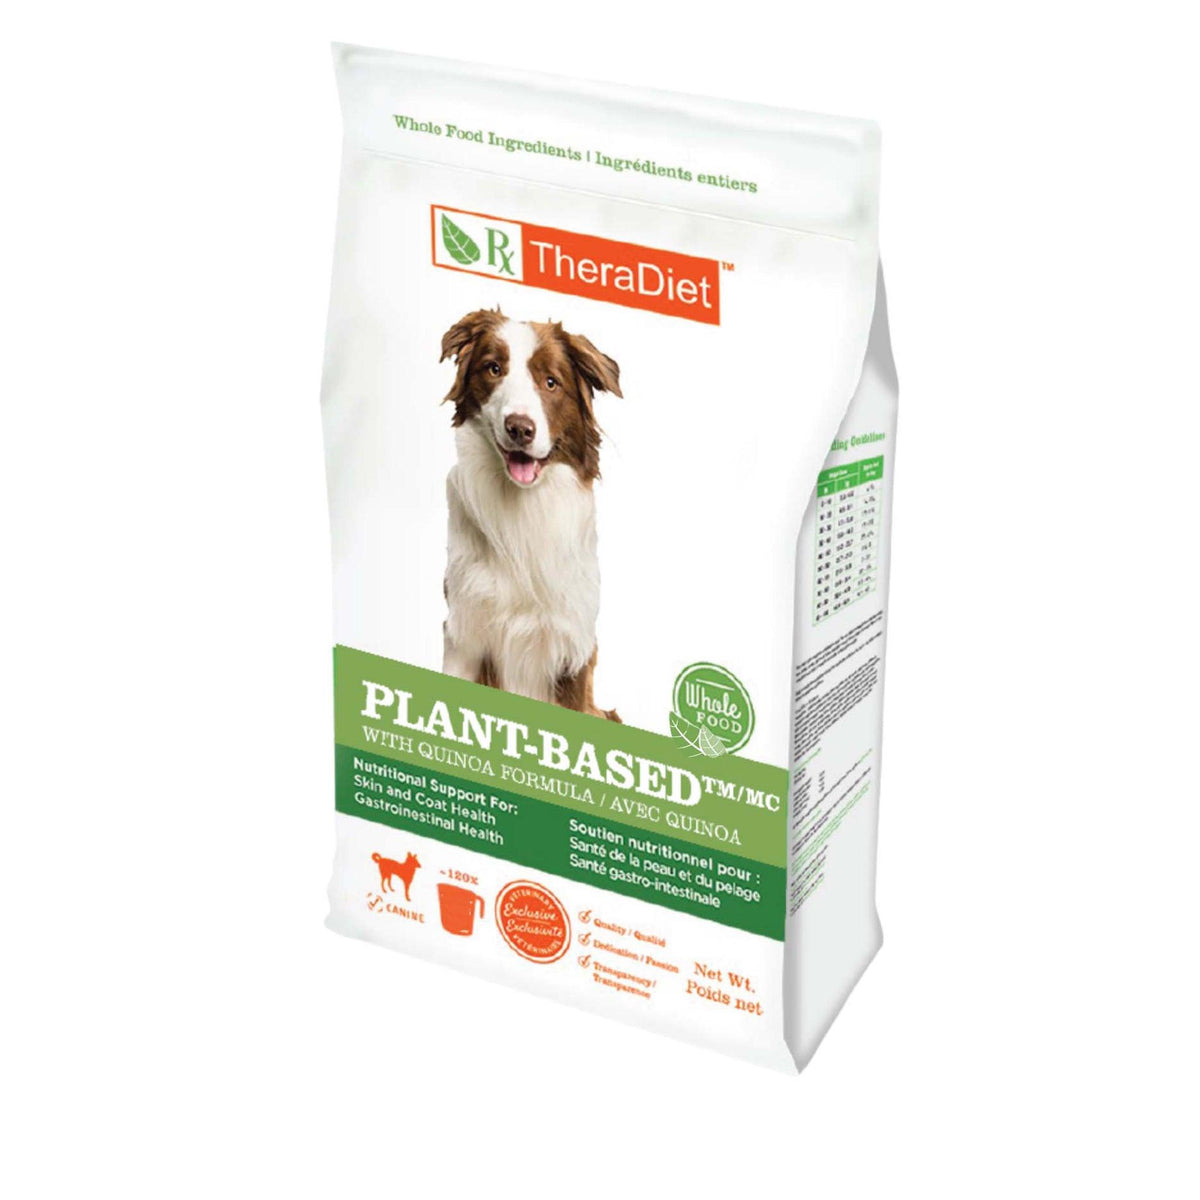 Front and side panel view of canine Plant-Based dry food bag.